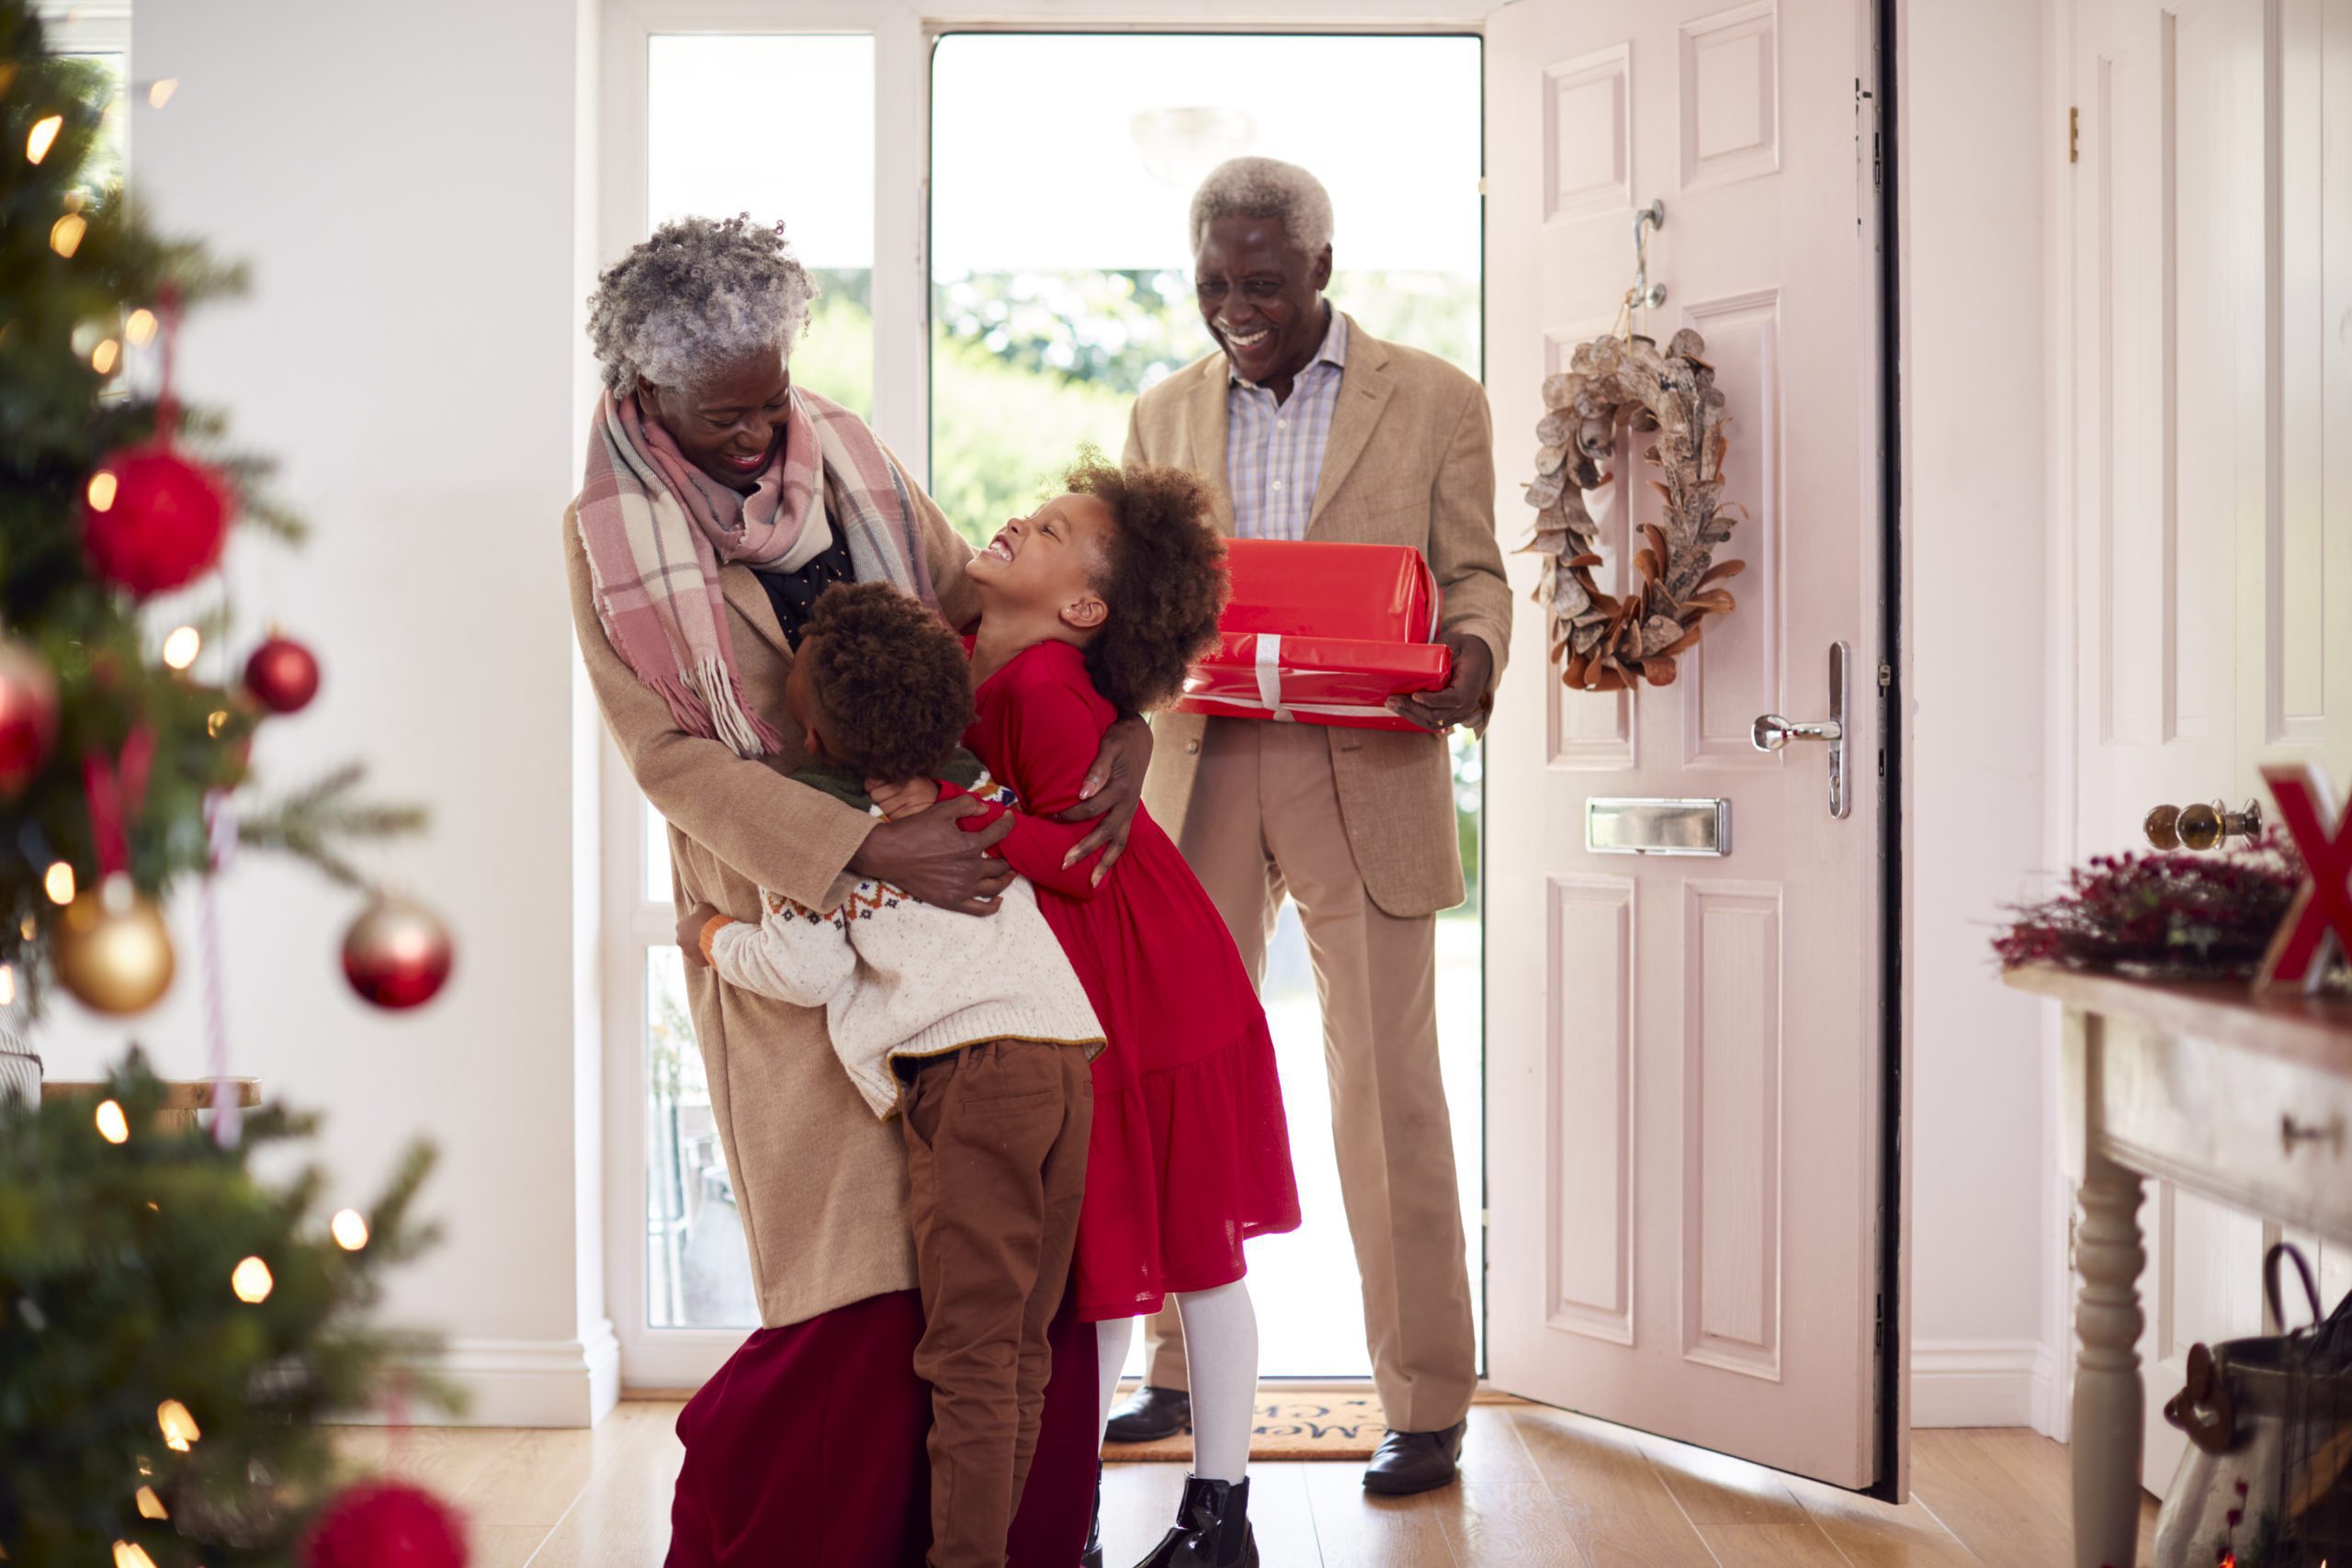 Grandkids visiting their grandparents during the holidays